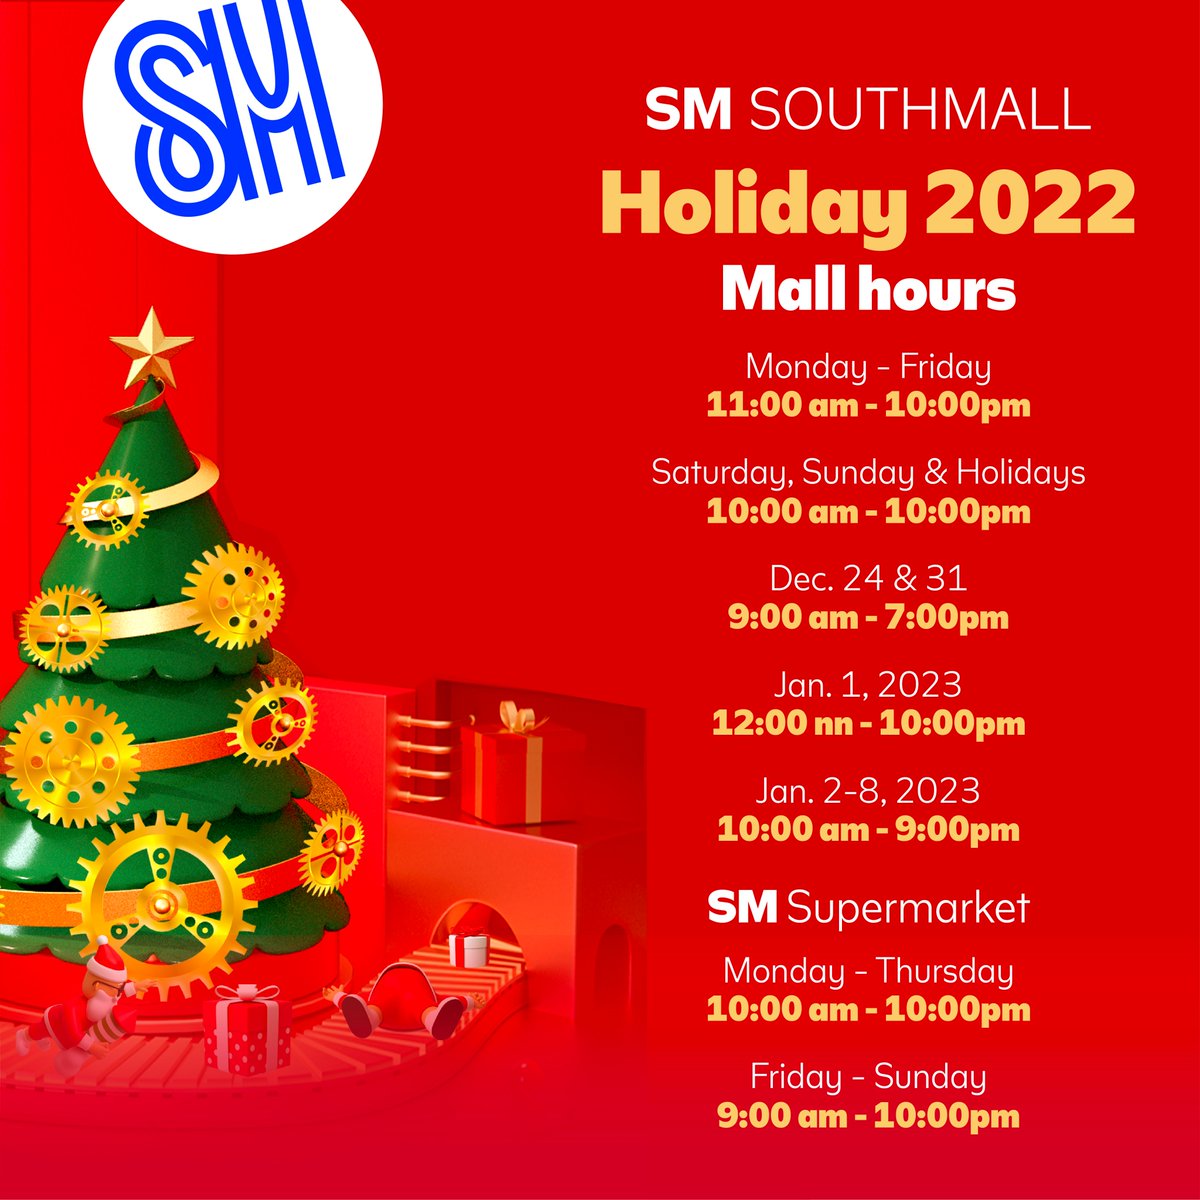 #SMAnnouncement: Take note of our adjusted mall hours starting November 14, 2022. Please check out our updated mall hours at gosm.link/MallHoursSM. Stay safe and #SeeYouDownSouth Southies!